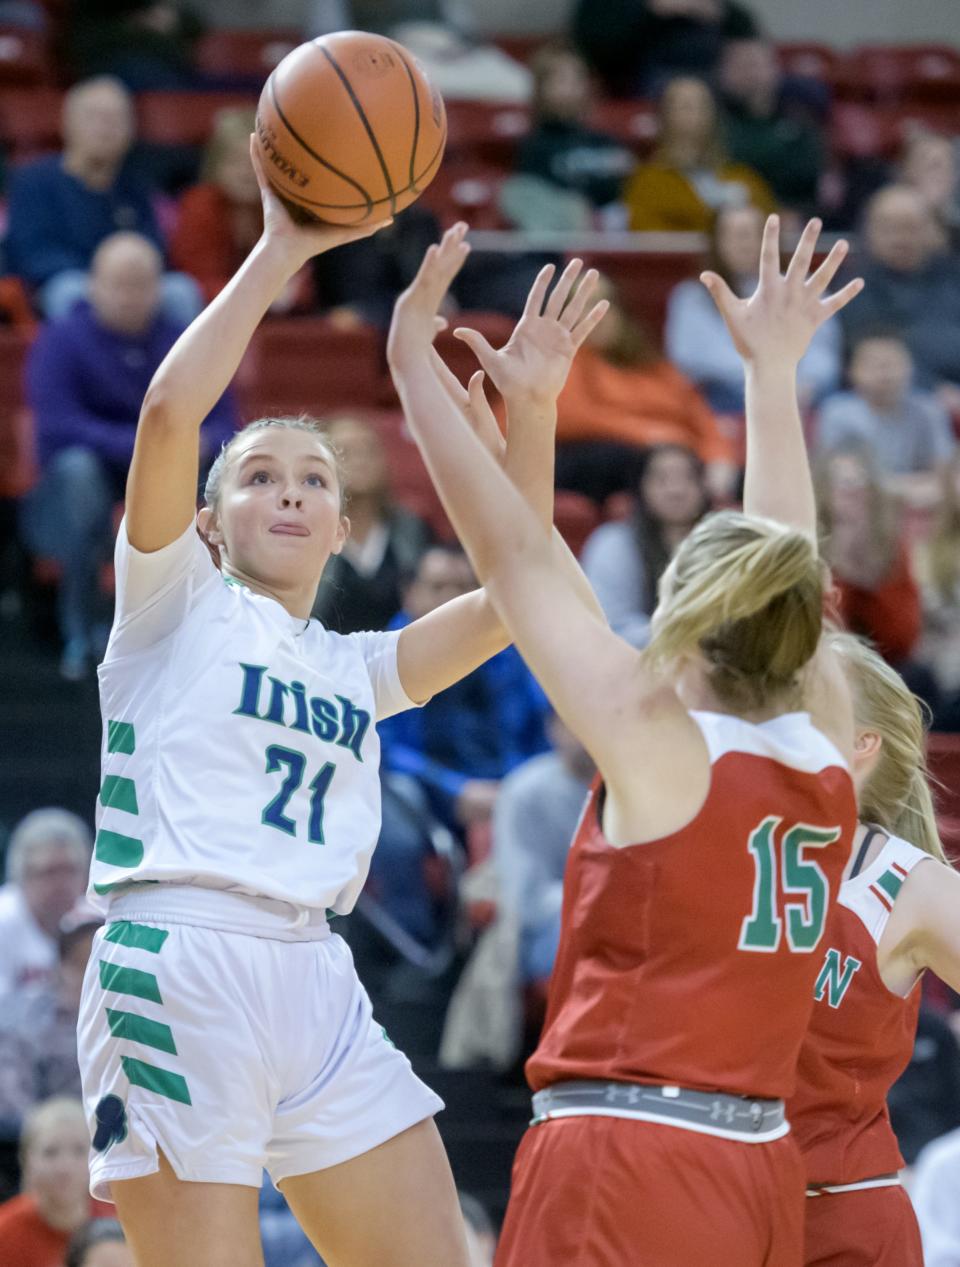 Peoria Notre Dame's Kaitlin Cassidy puts up a shot over Lincoln's Piper Whiteman in the first half of their nonconference basketball game Saturday, Jan. 20, 2024 at Renaissance Coliseum in Peoria. The Irish fell to the Railsplitters 63-52.